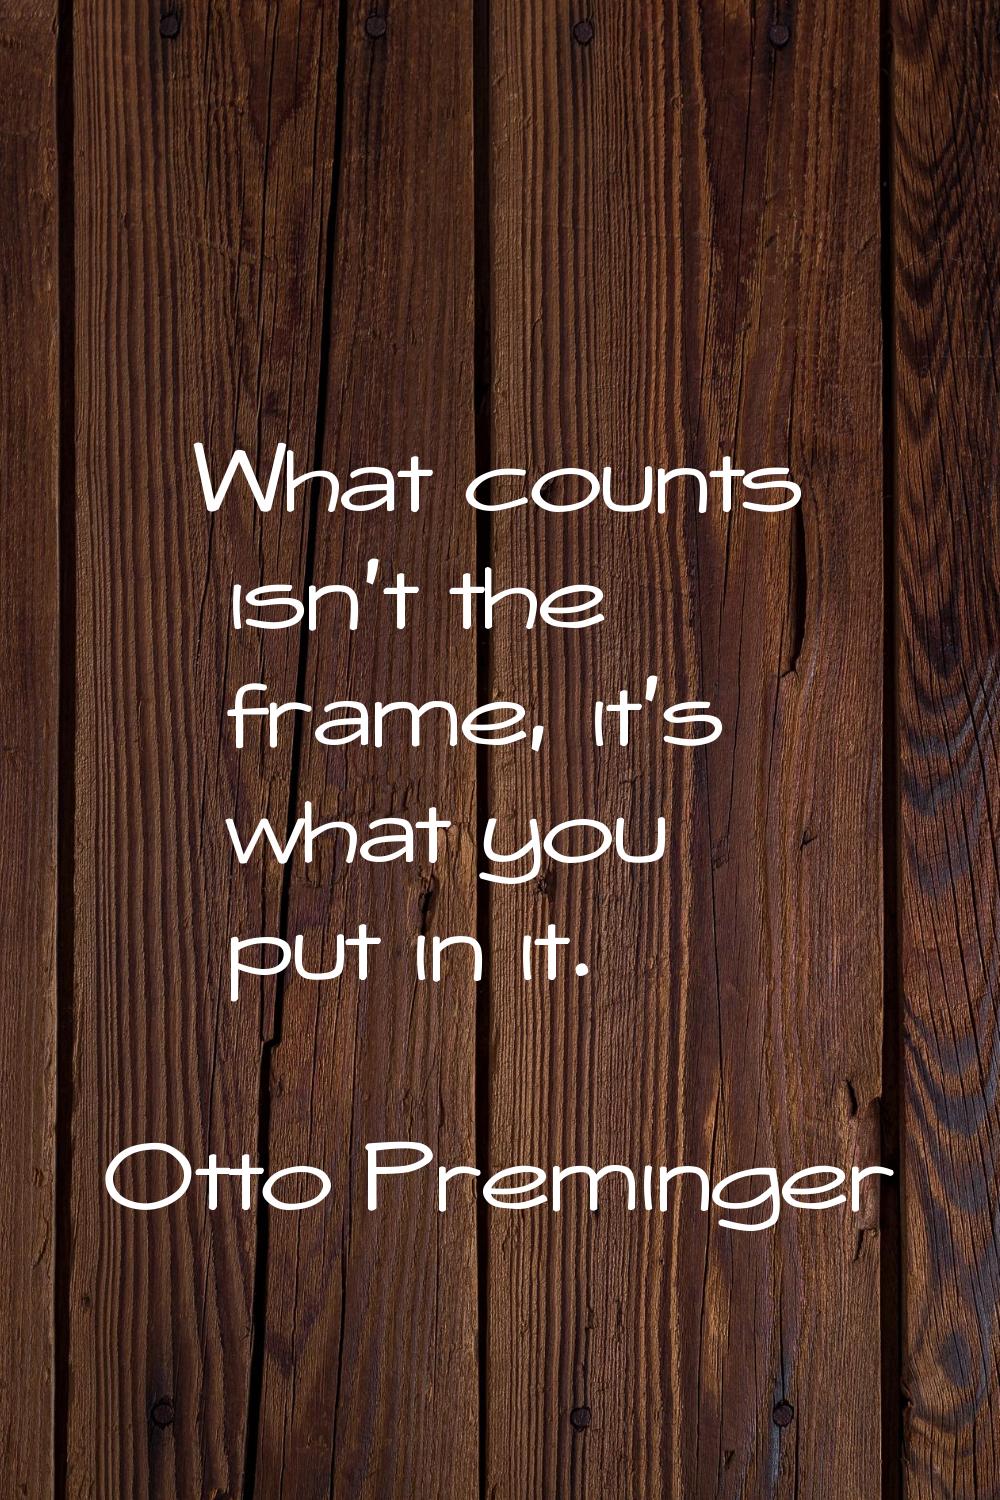 What counts isn't the frame, it's what you put in it.